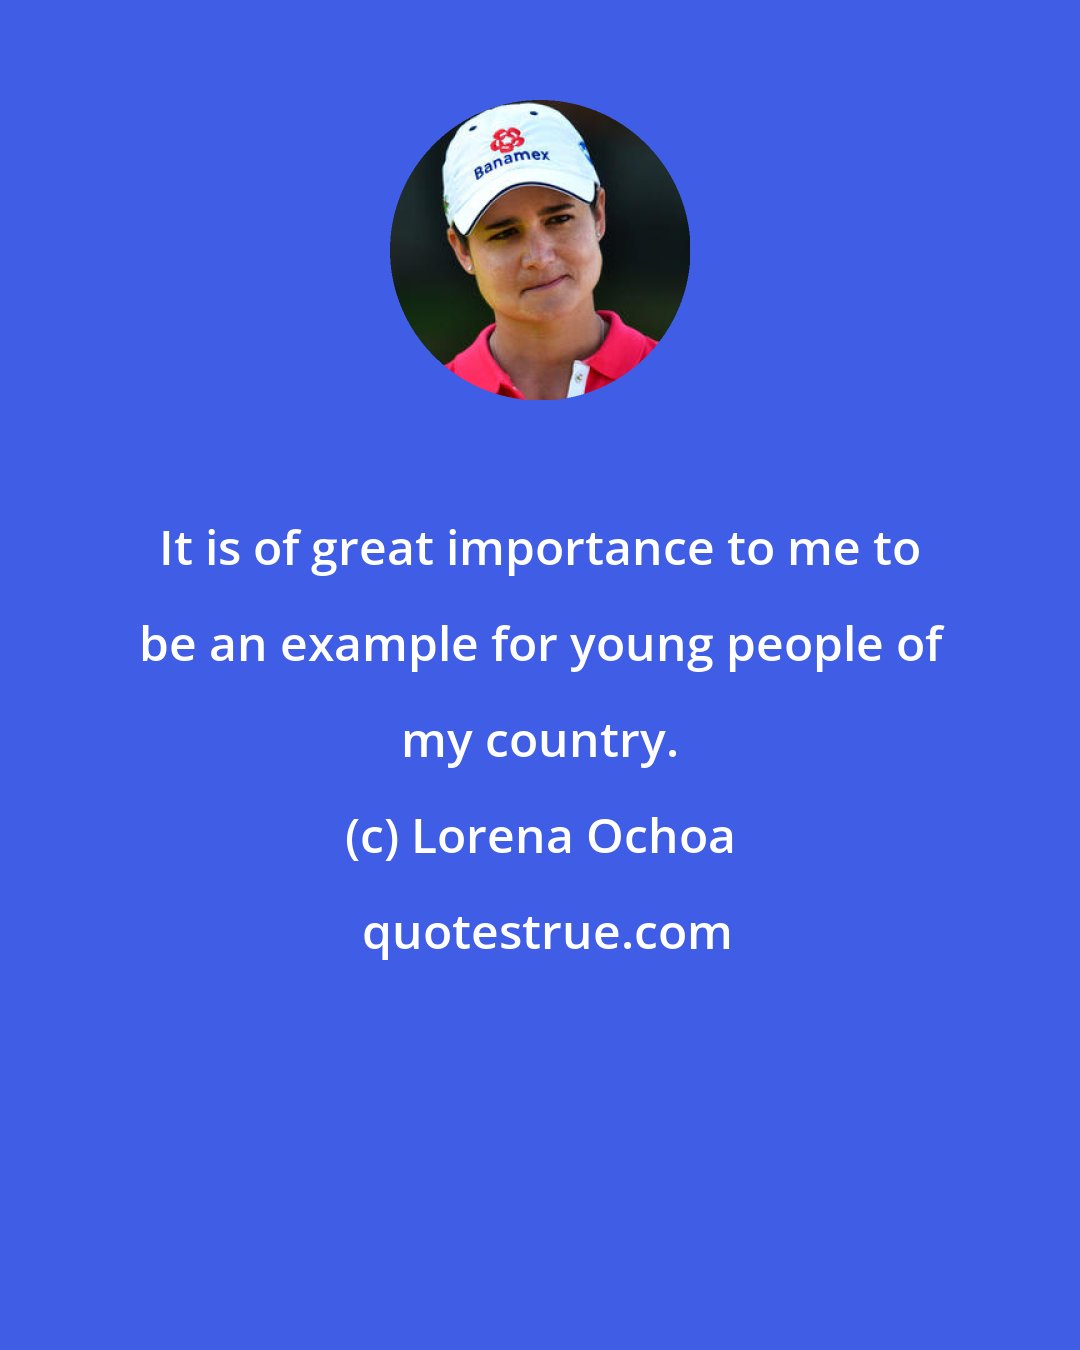 Lorena Ochoa: It is of great importance to me to be an example for young people of my country.